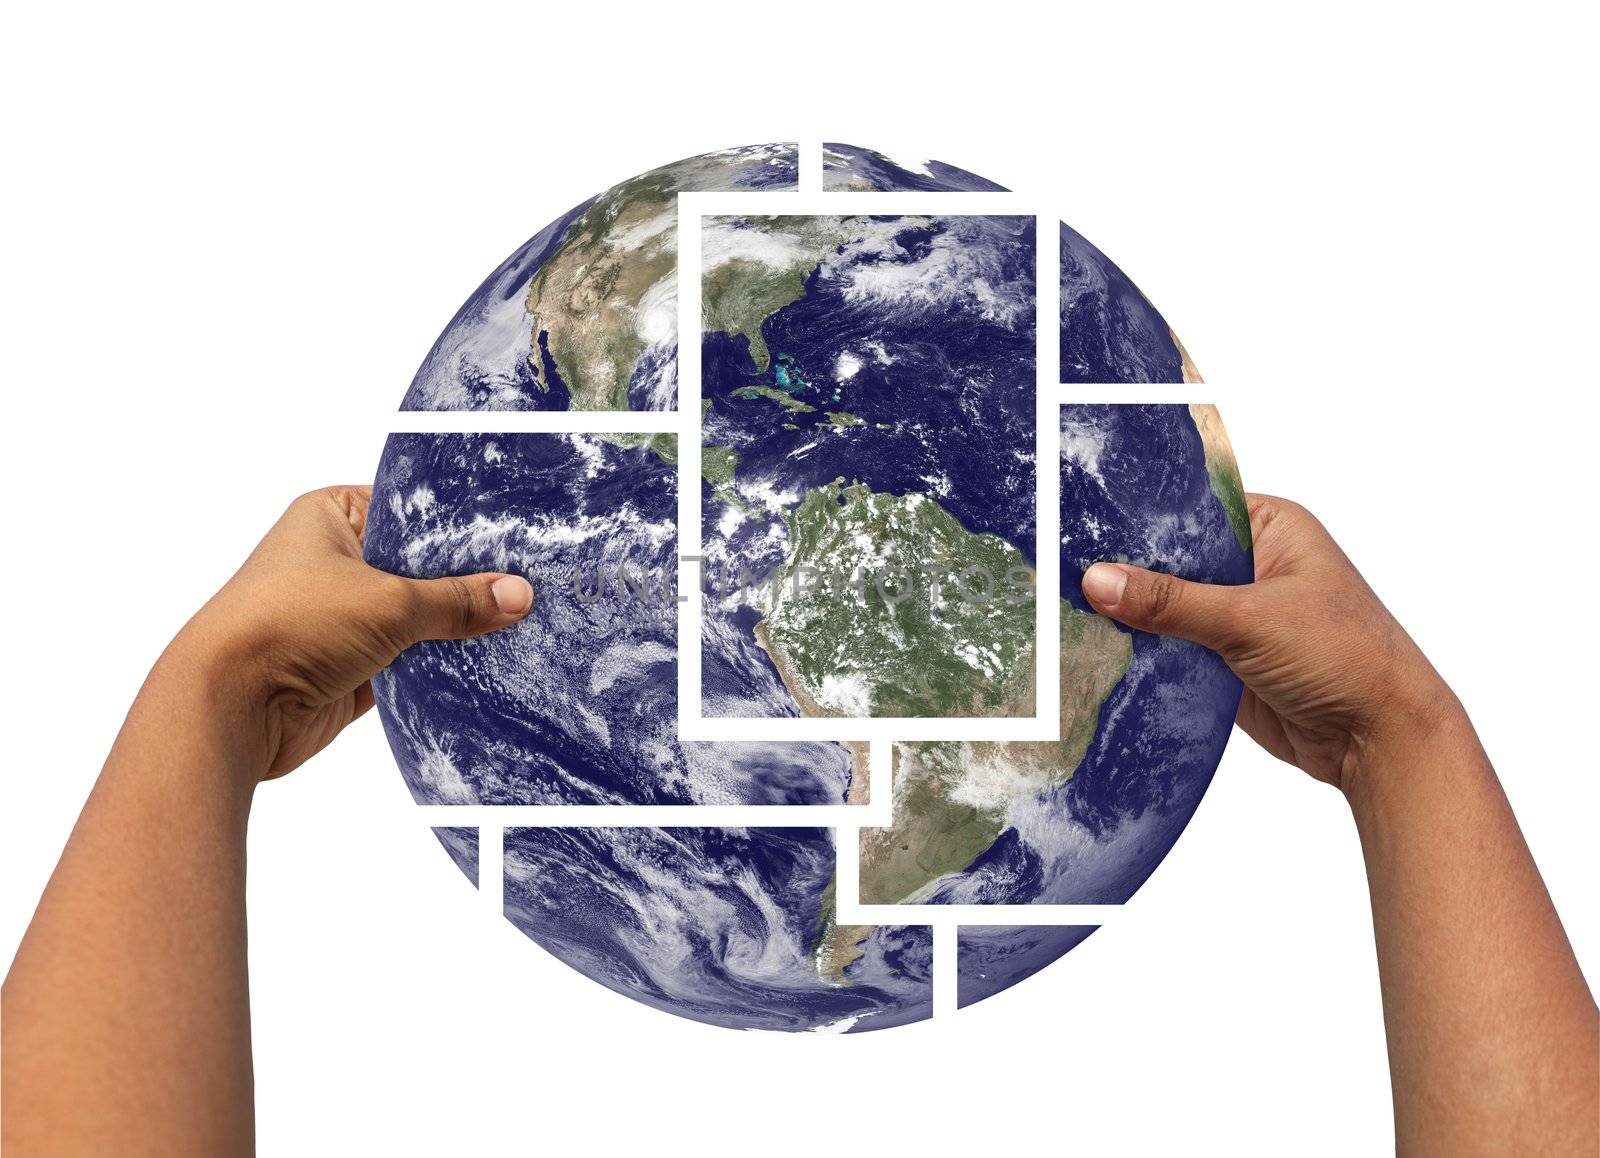 Woman assembling and holding earth photos partitioned and then joined again. Concept of saving earth. Earth photo credit - http://www.nasa.gov